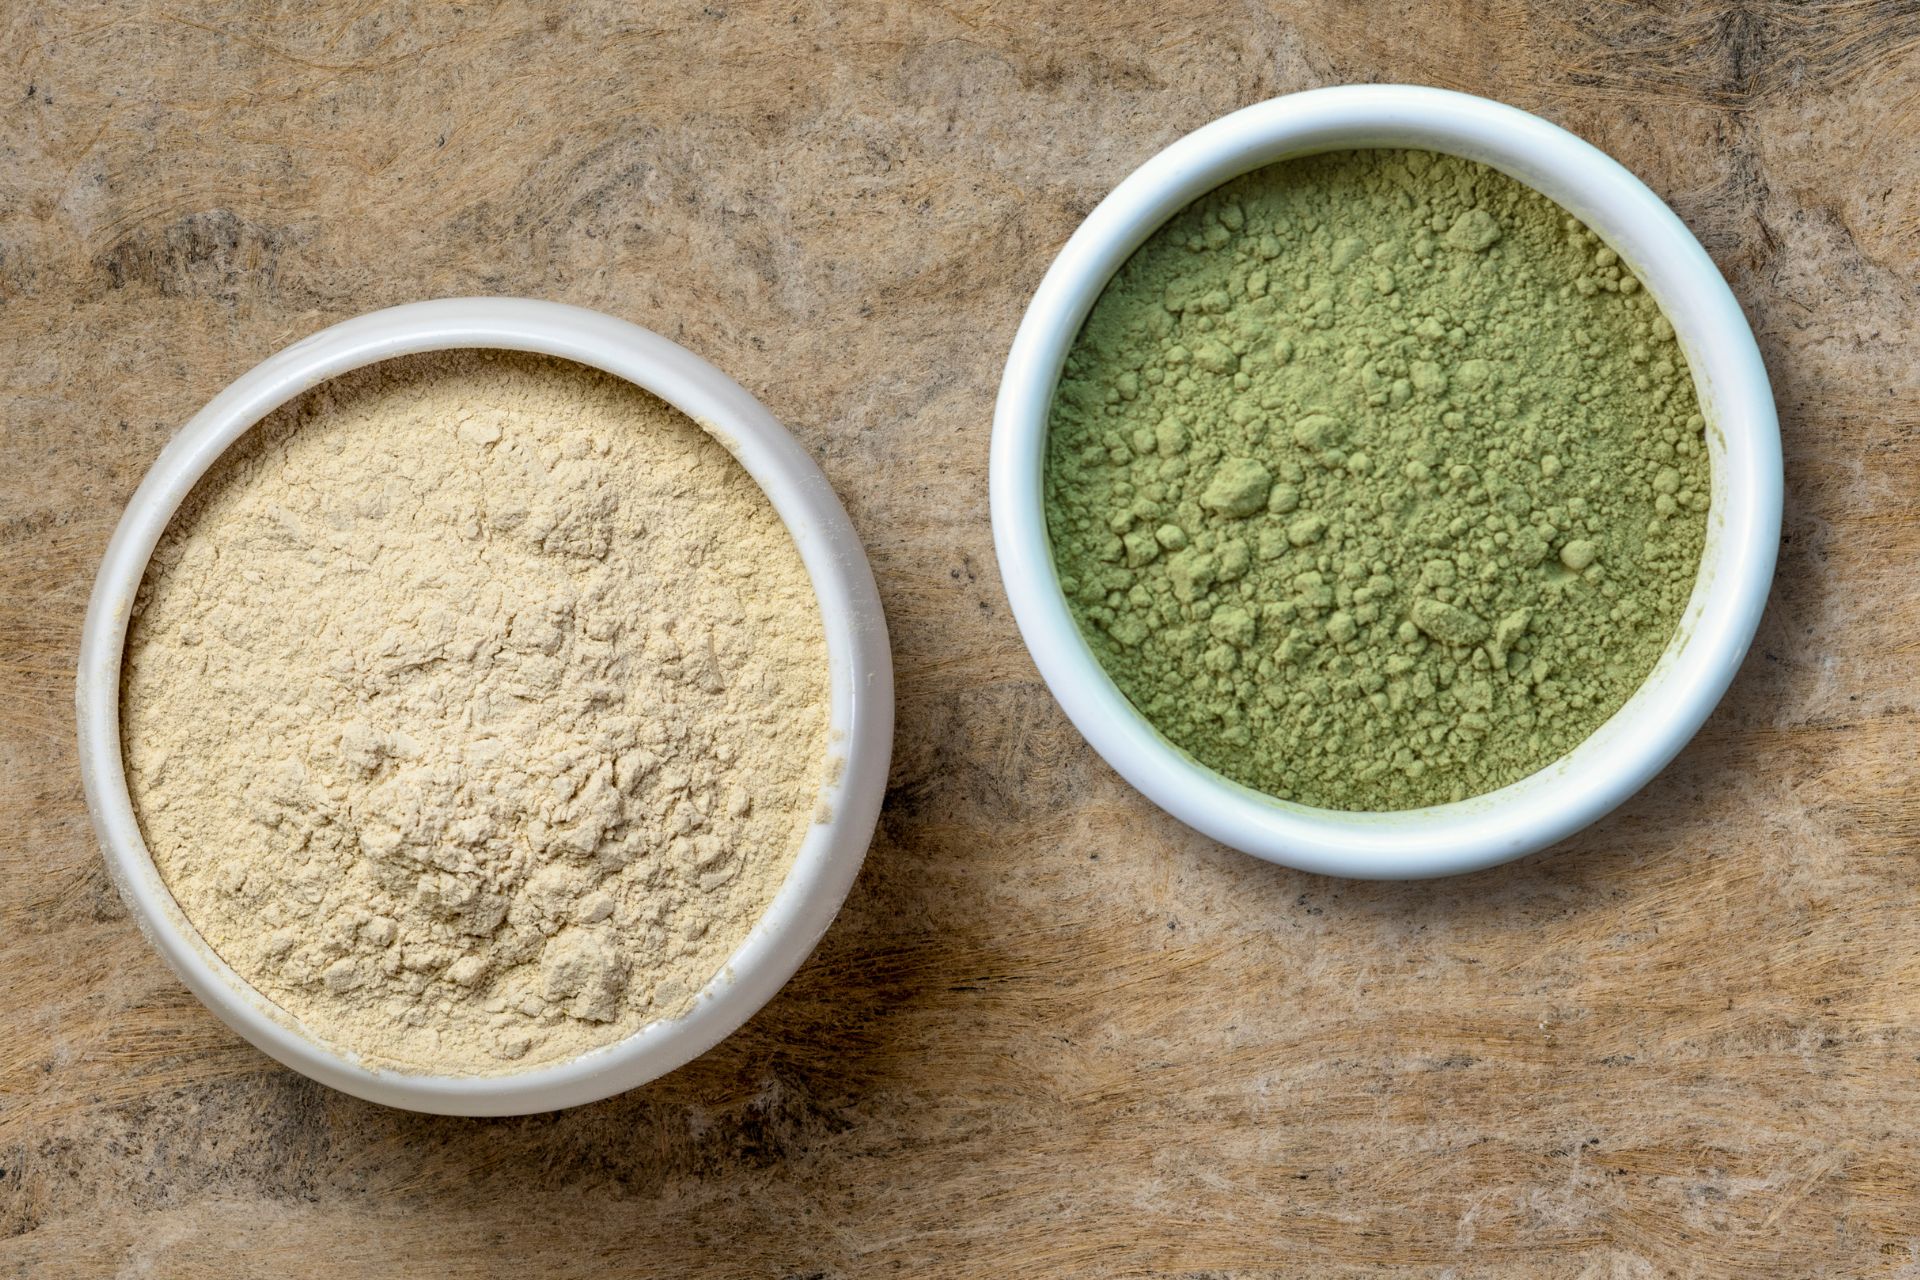 Ashwagandha and kratom: The similarities, differences, and possible interactions